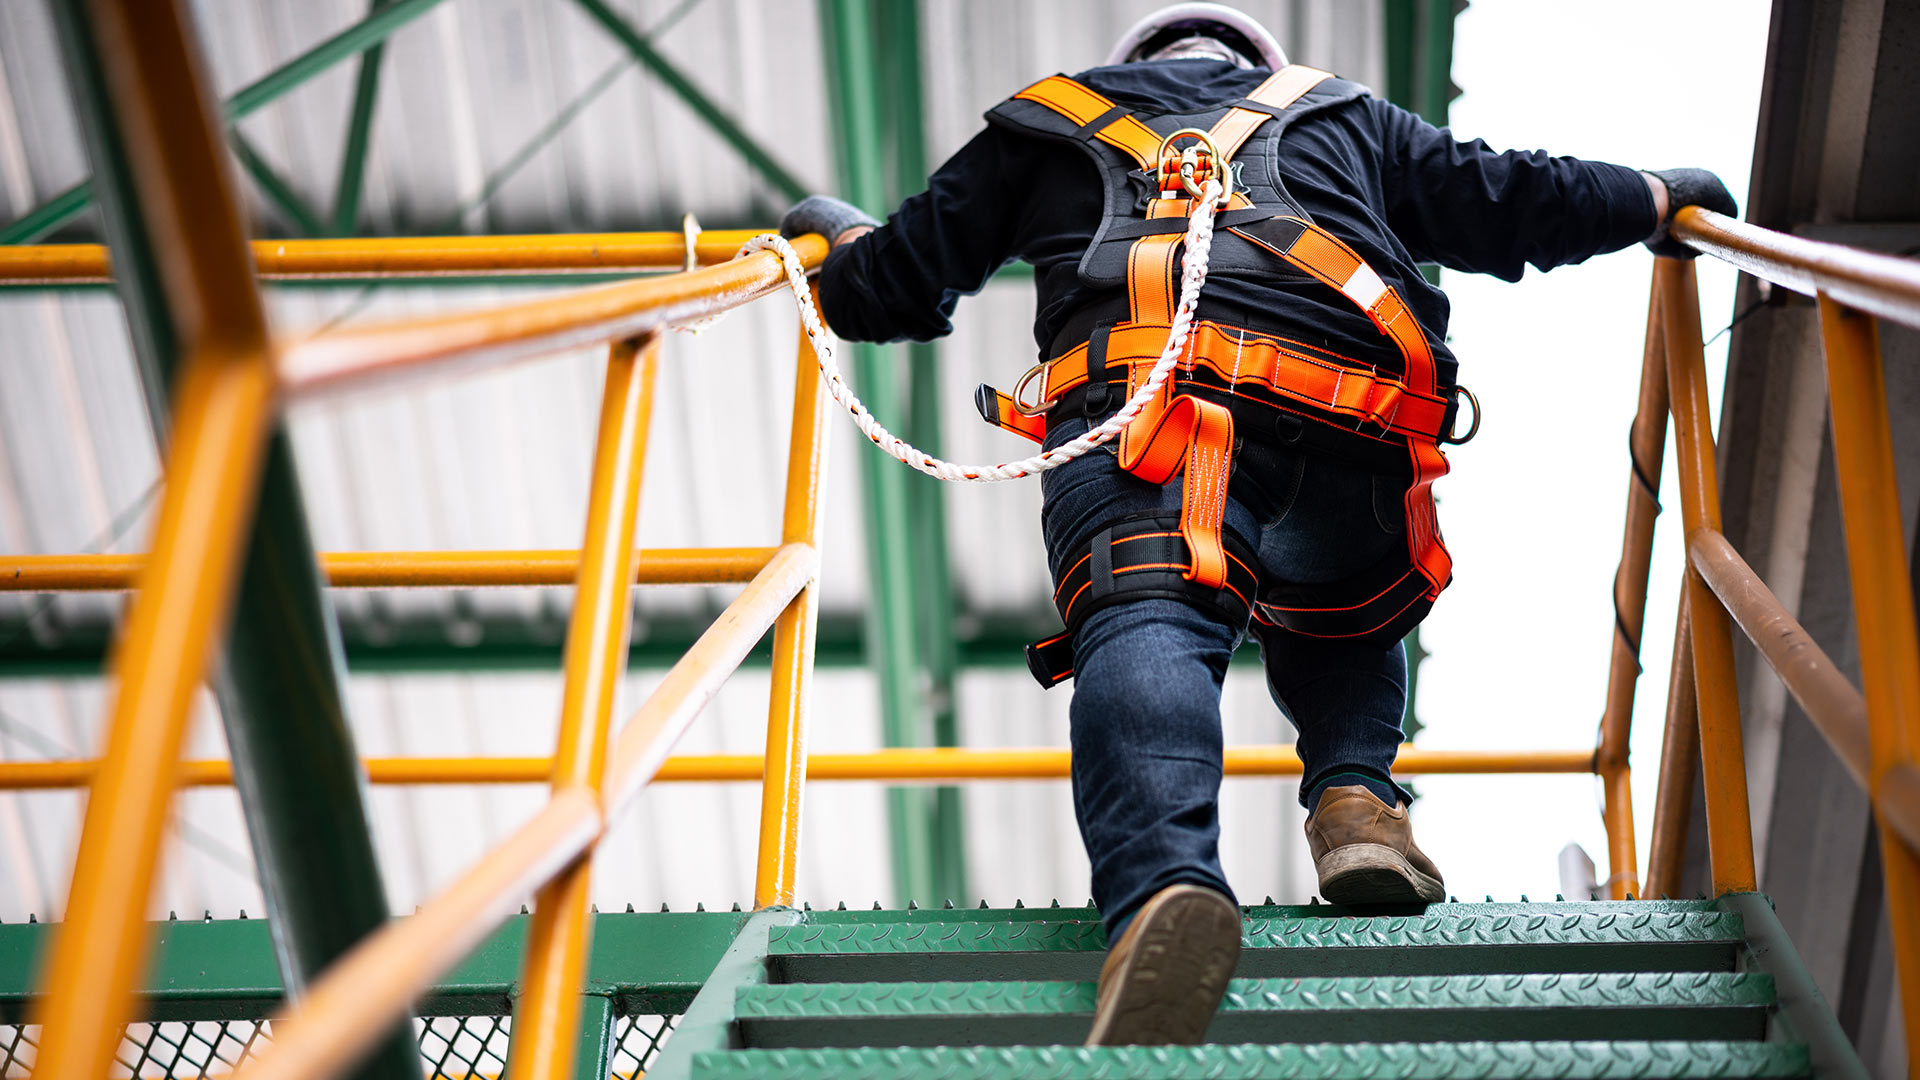 Work health and safety class action risk for directors: An emerging space